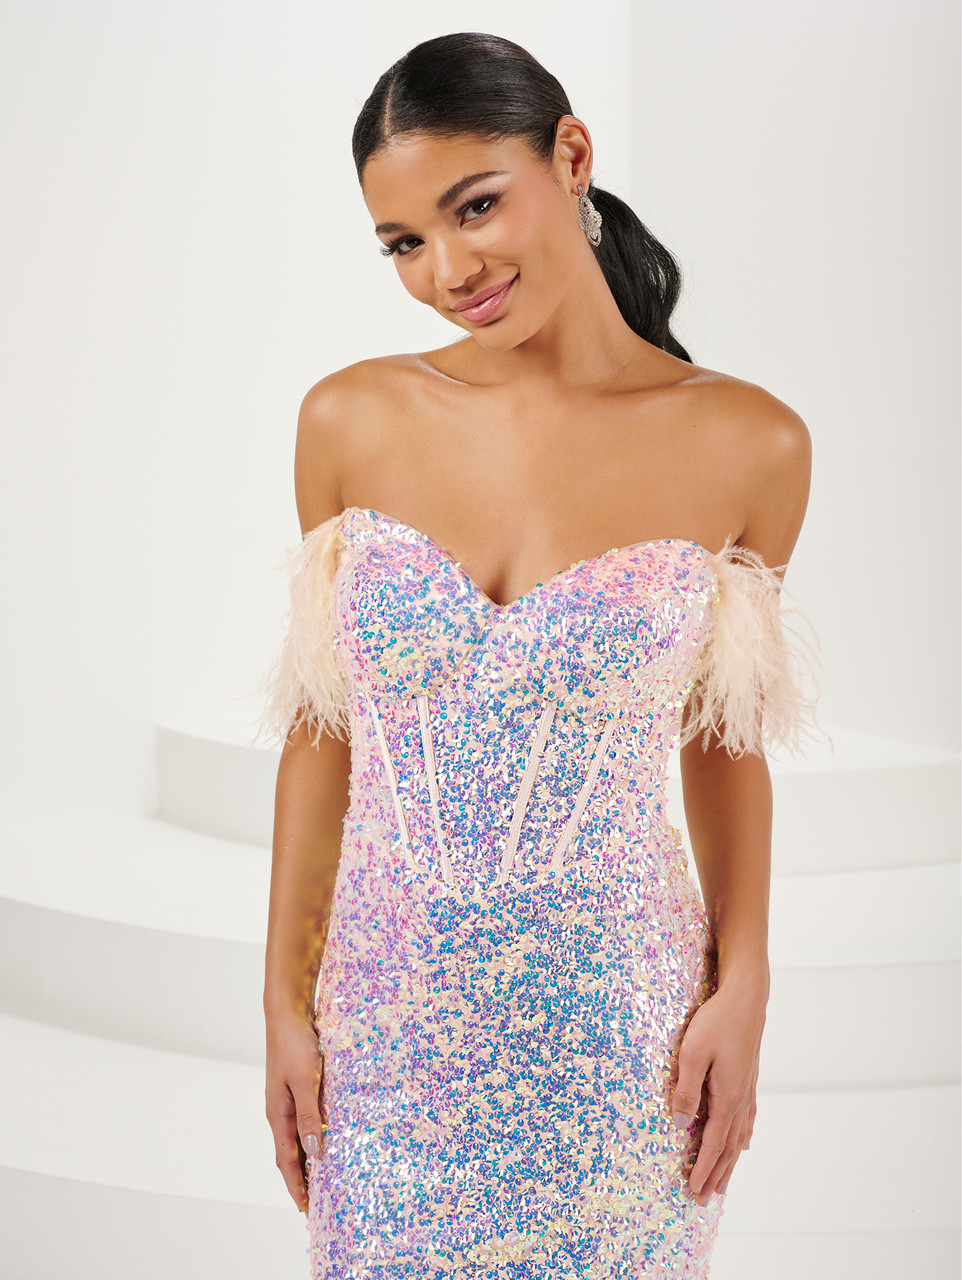 Tiffany Designs 16106 Feathers Sequin Strapless Long Dress